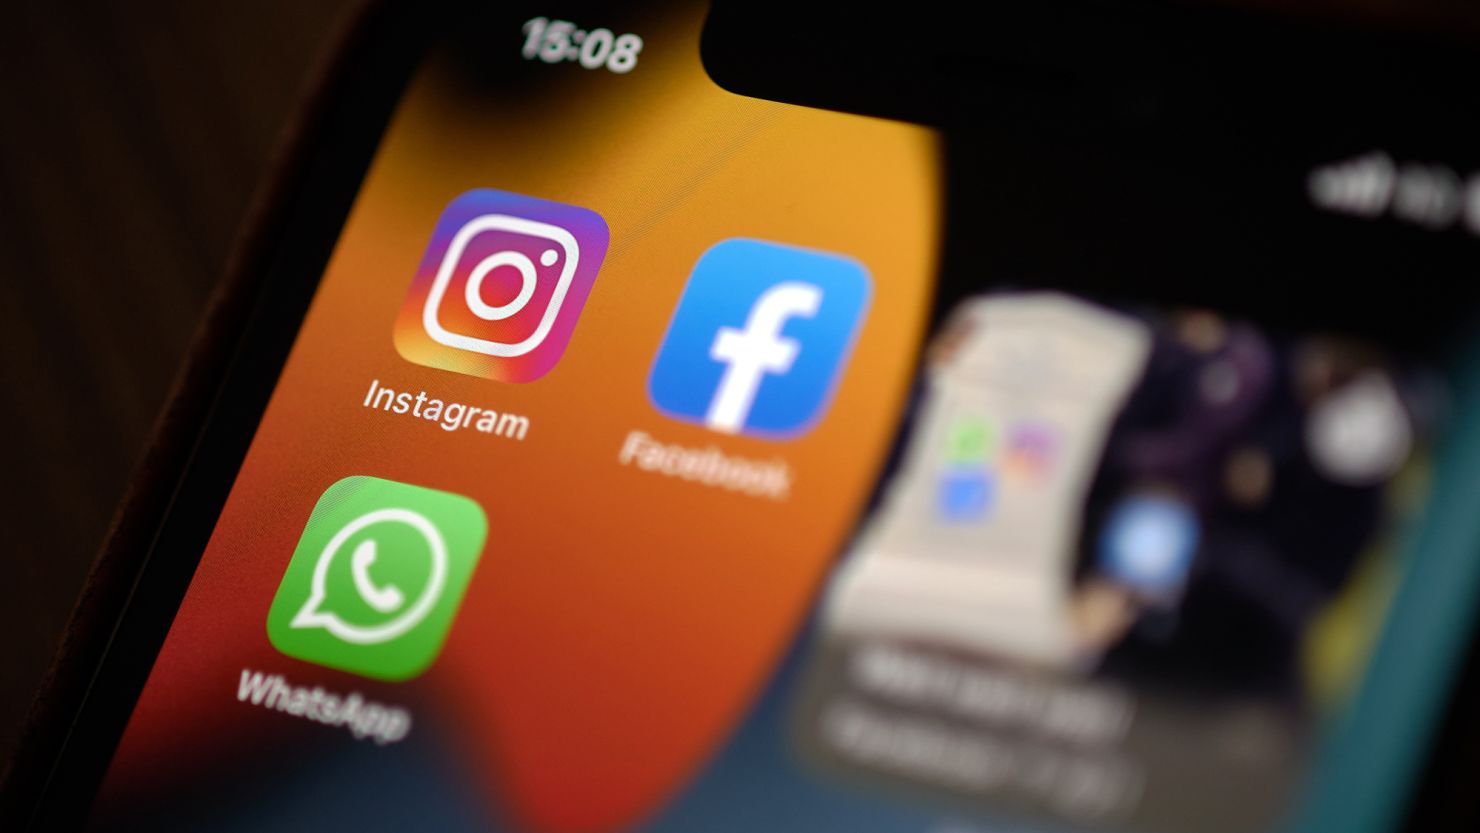 Instagram, Facebook and Whatsapp applications seen on a mobile phone.